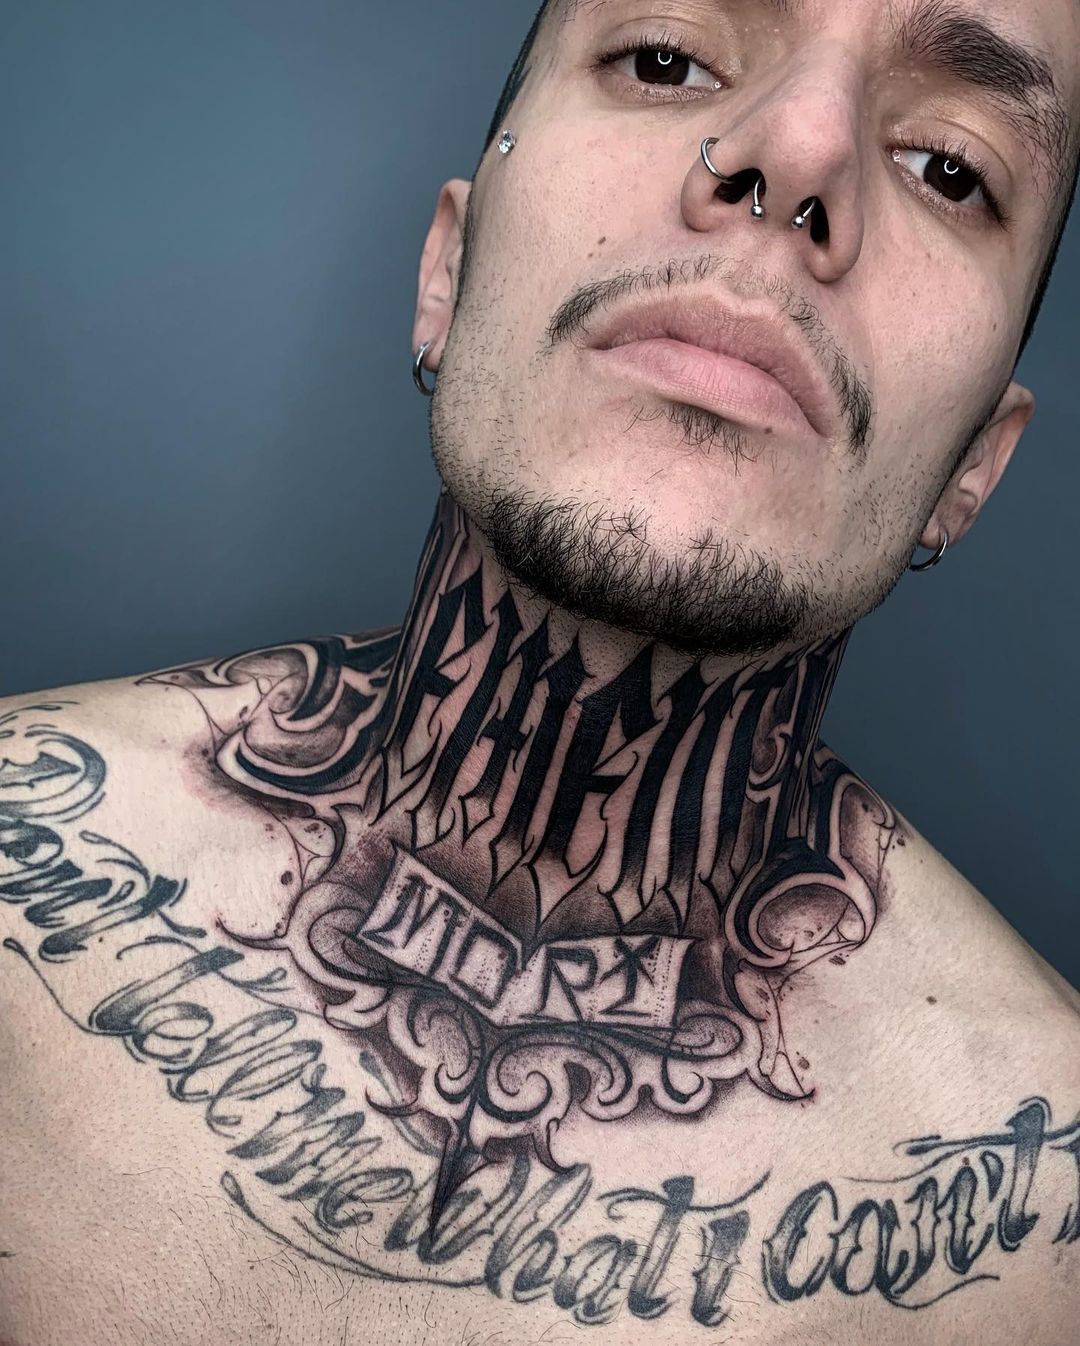 Lettering Neck Tattoo by Wabori